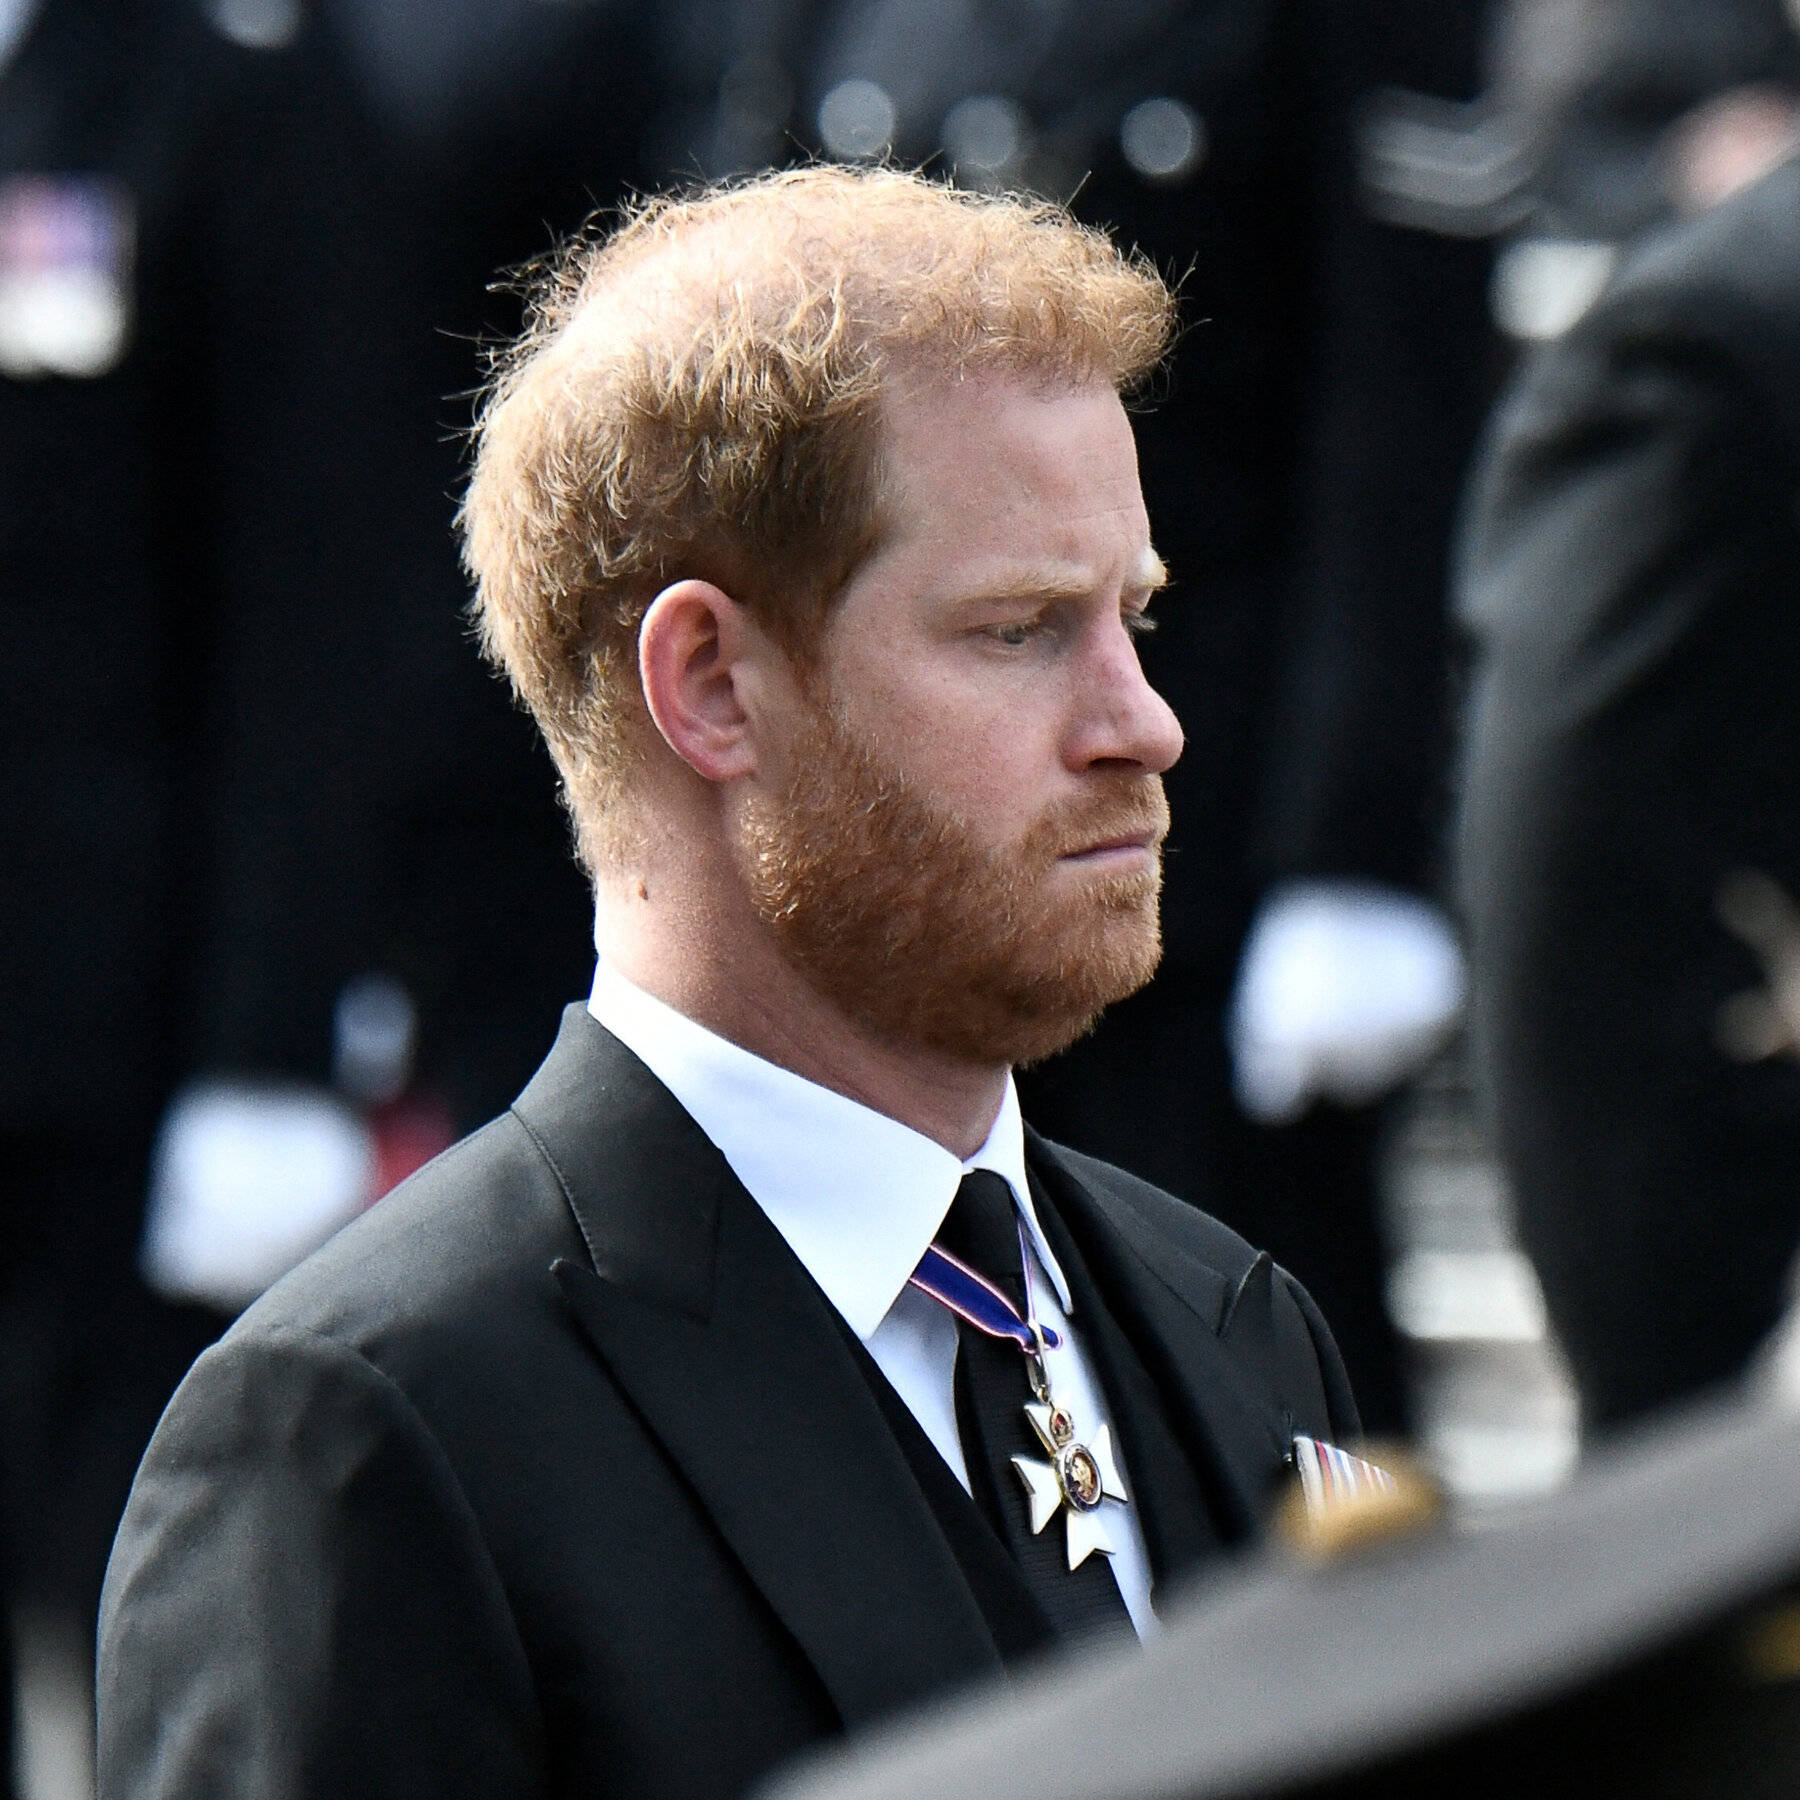 An Emotional Moment Captured Of Prince Harry Wallpaper